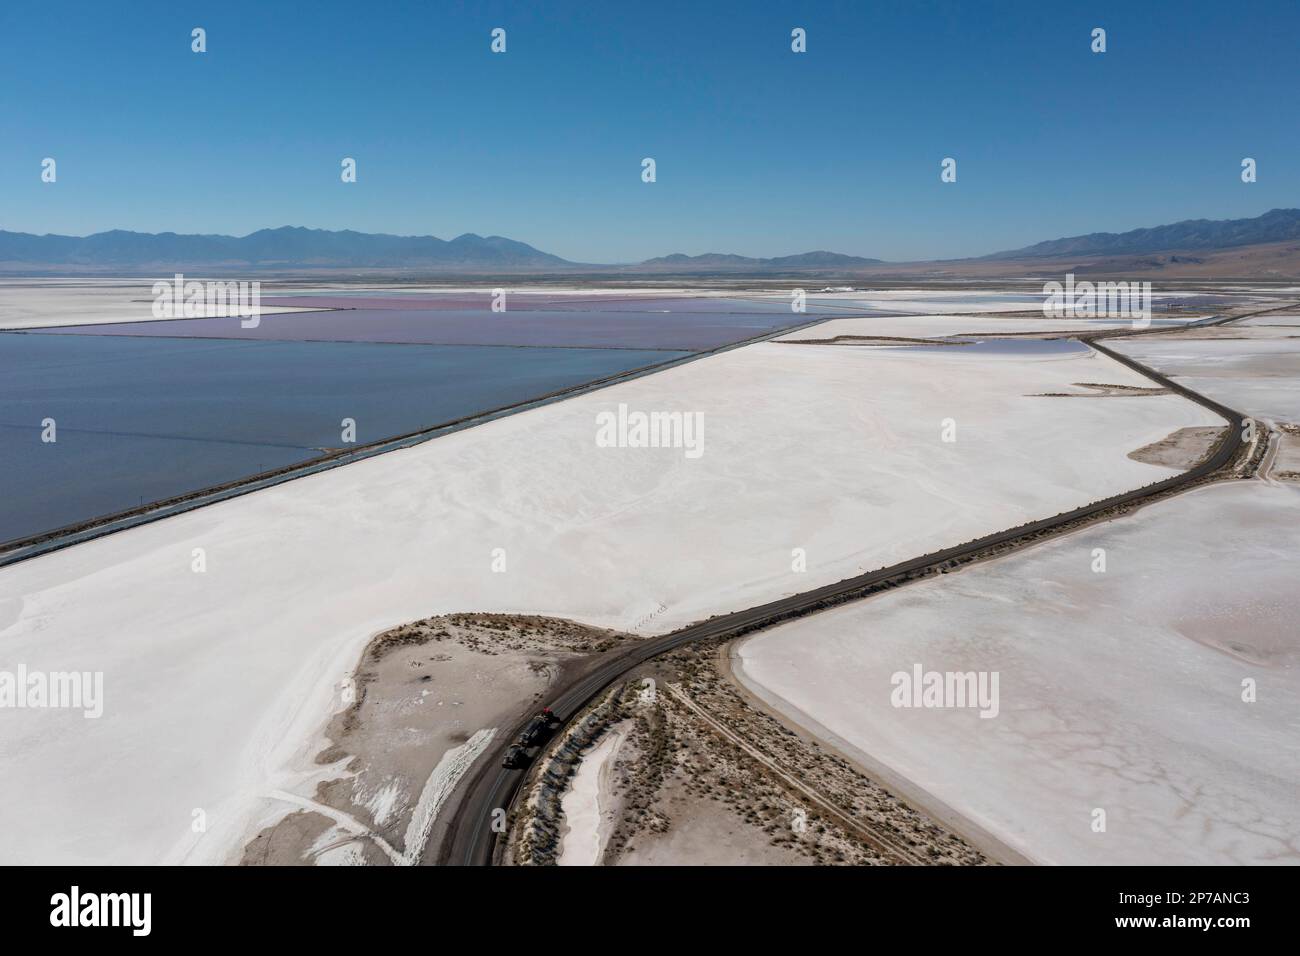 Grantsville, Utah, The Morton Salt facility, where salt is produced by impounding brine in shallow evaporation ponds at the edge of Great Salt Lake. Stock Photo